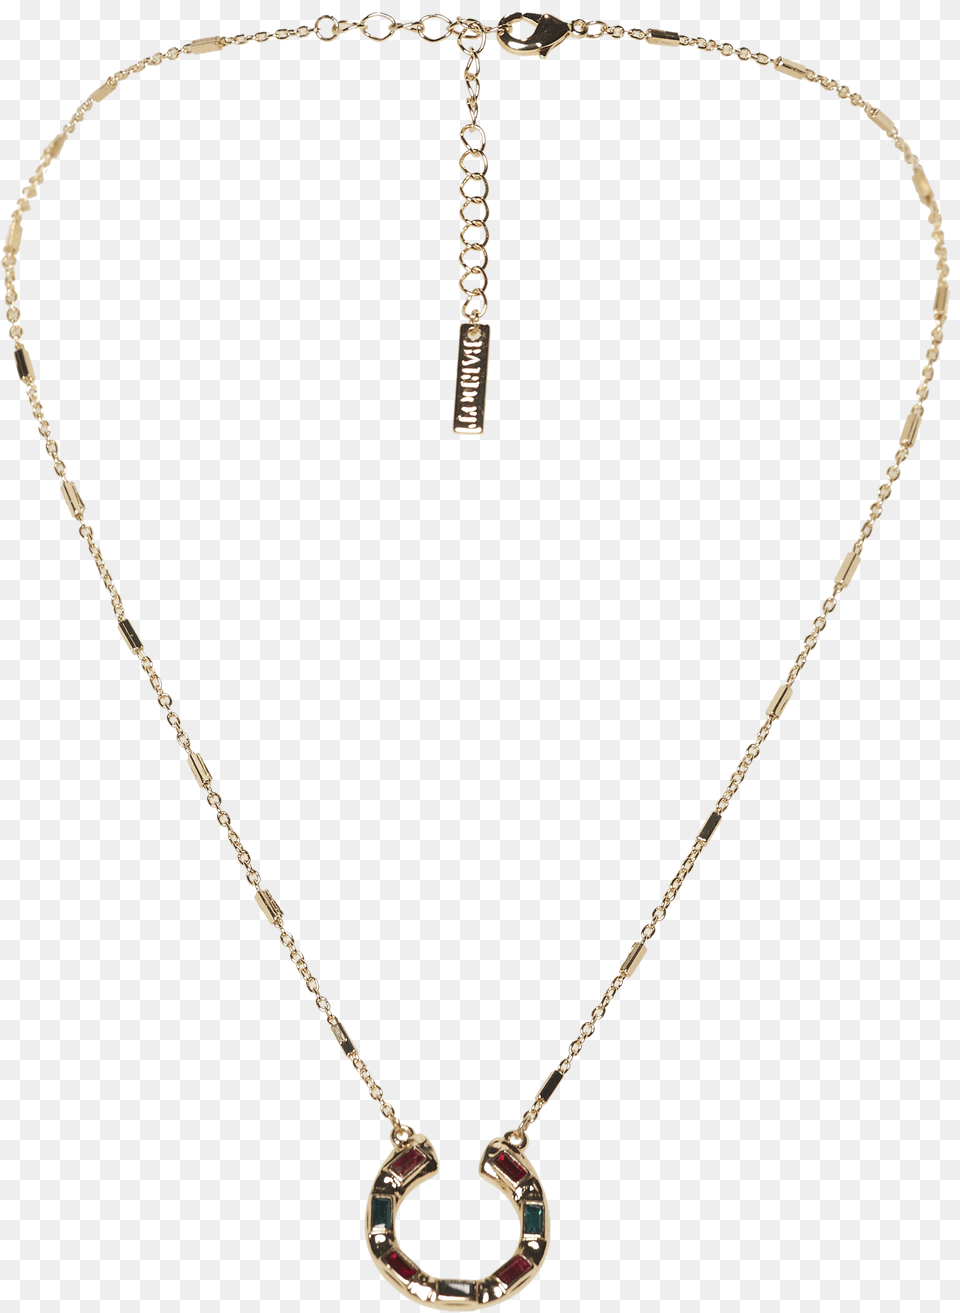 Horse Shoe Necklace In Colour Gold Earth, Accessories, Jewelry, Diamond, Gemstone Png